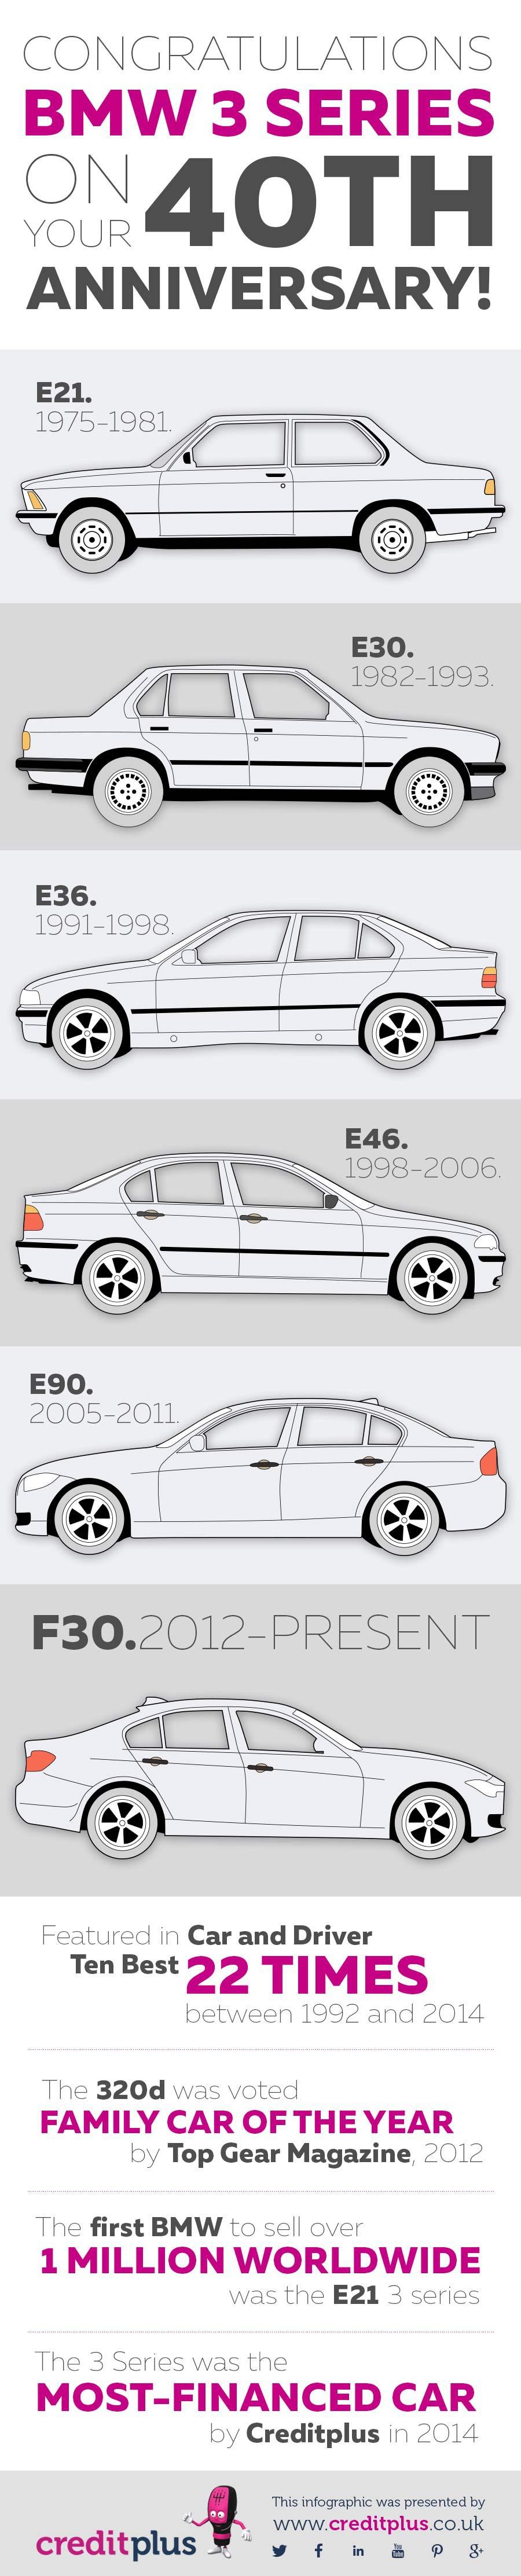 BMW 3-series history infographic